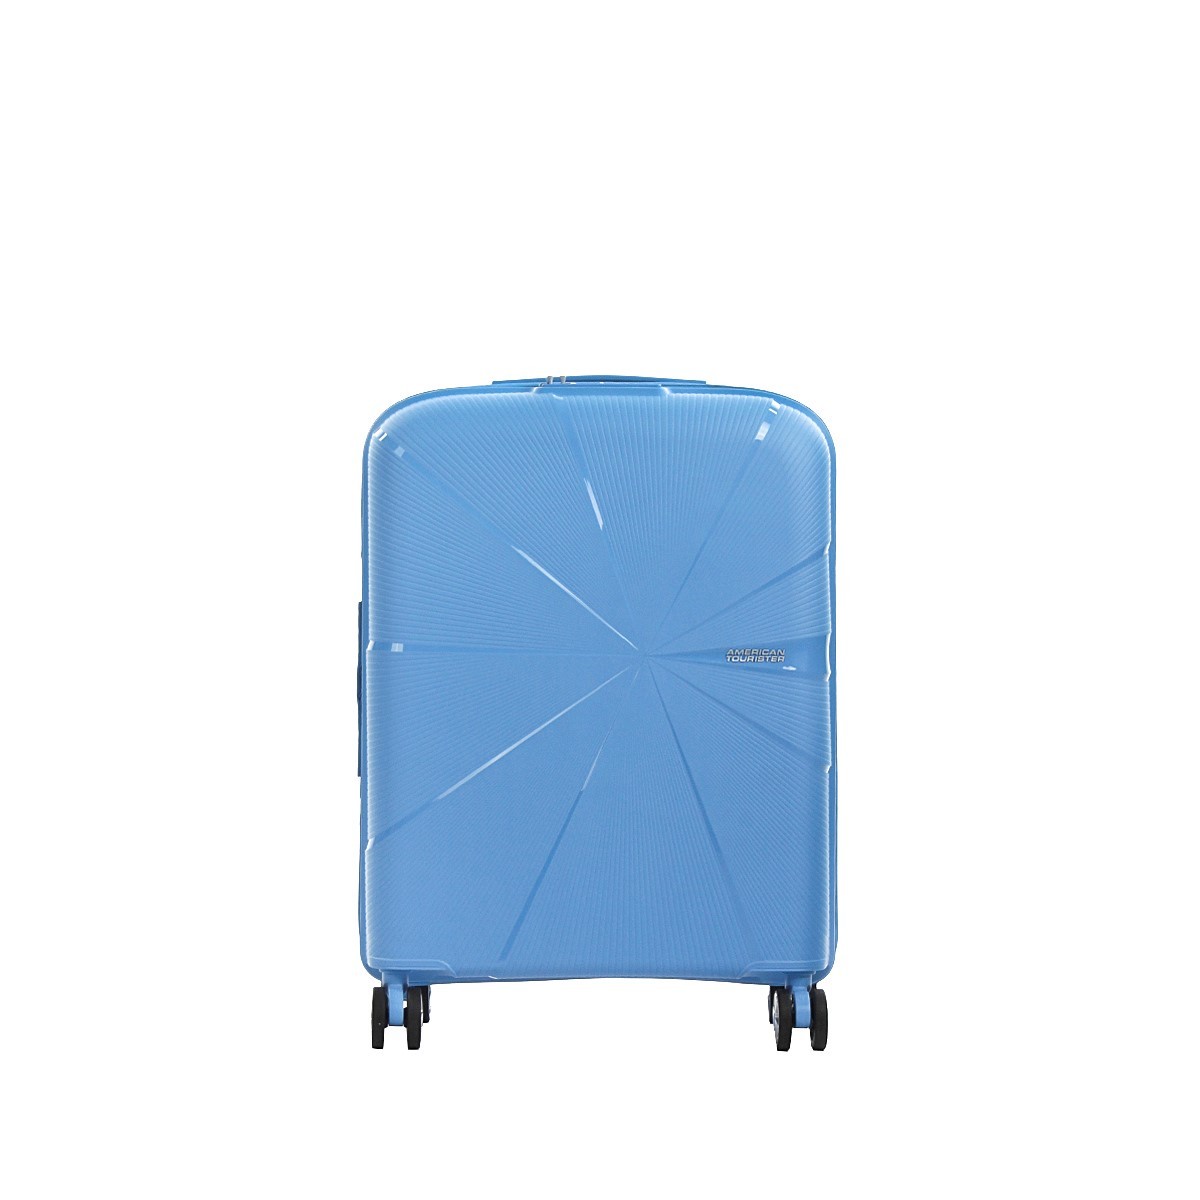 American tourister by samsonite Spinner cabina 4 ruote Tranquil blue Starvibe MD5*01002